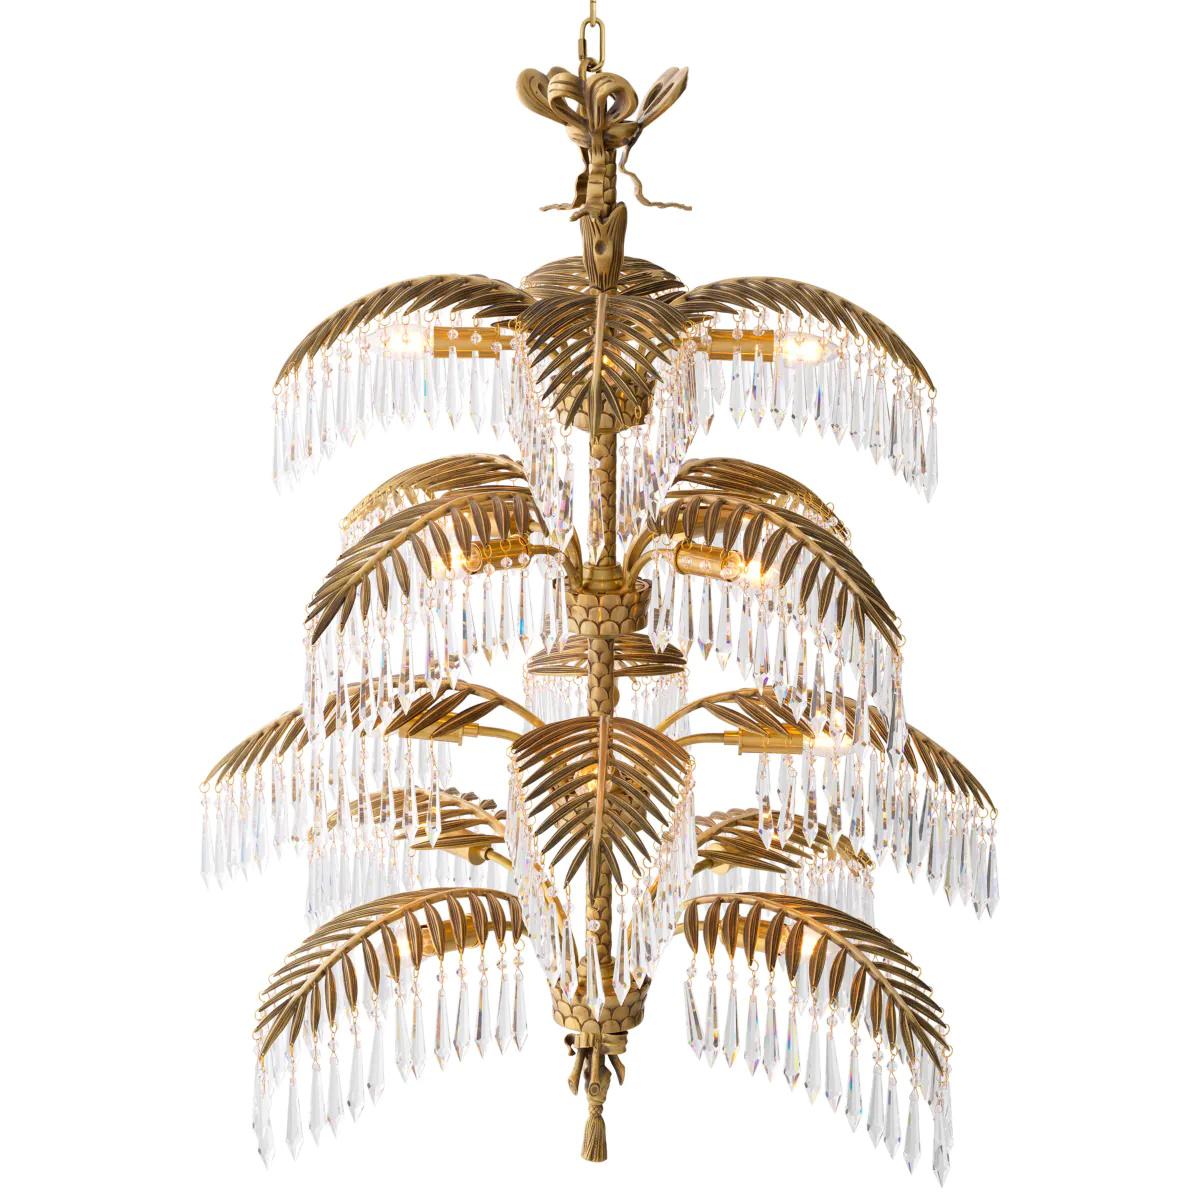 Beautiful chandelier with vintage brass finish and crystal pendants

Dimensions: ø 95 x H. 106 cm.